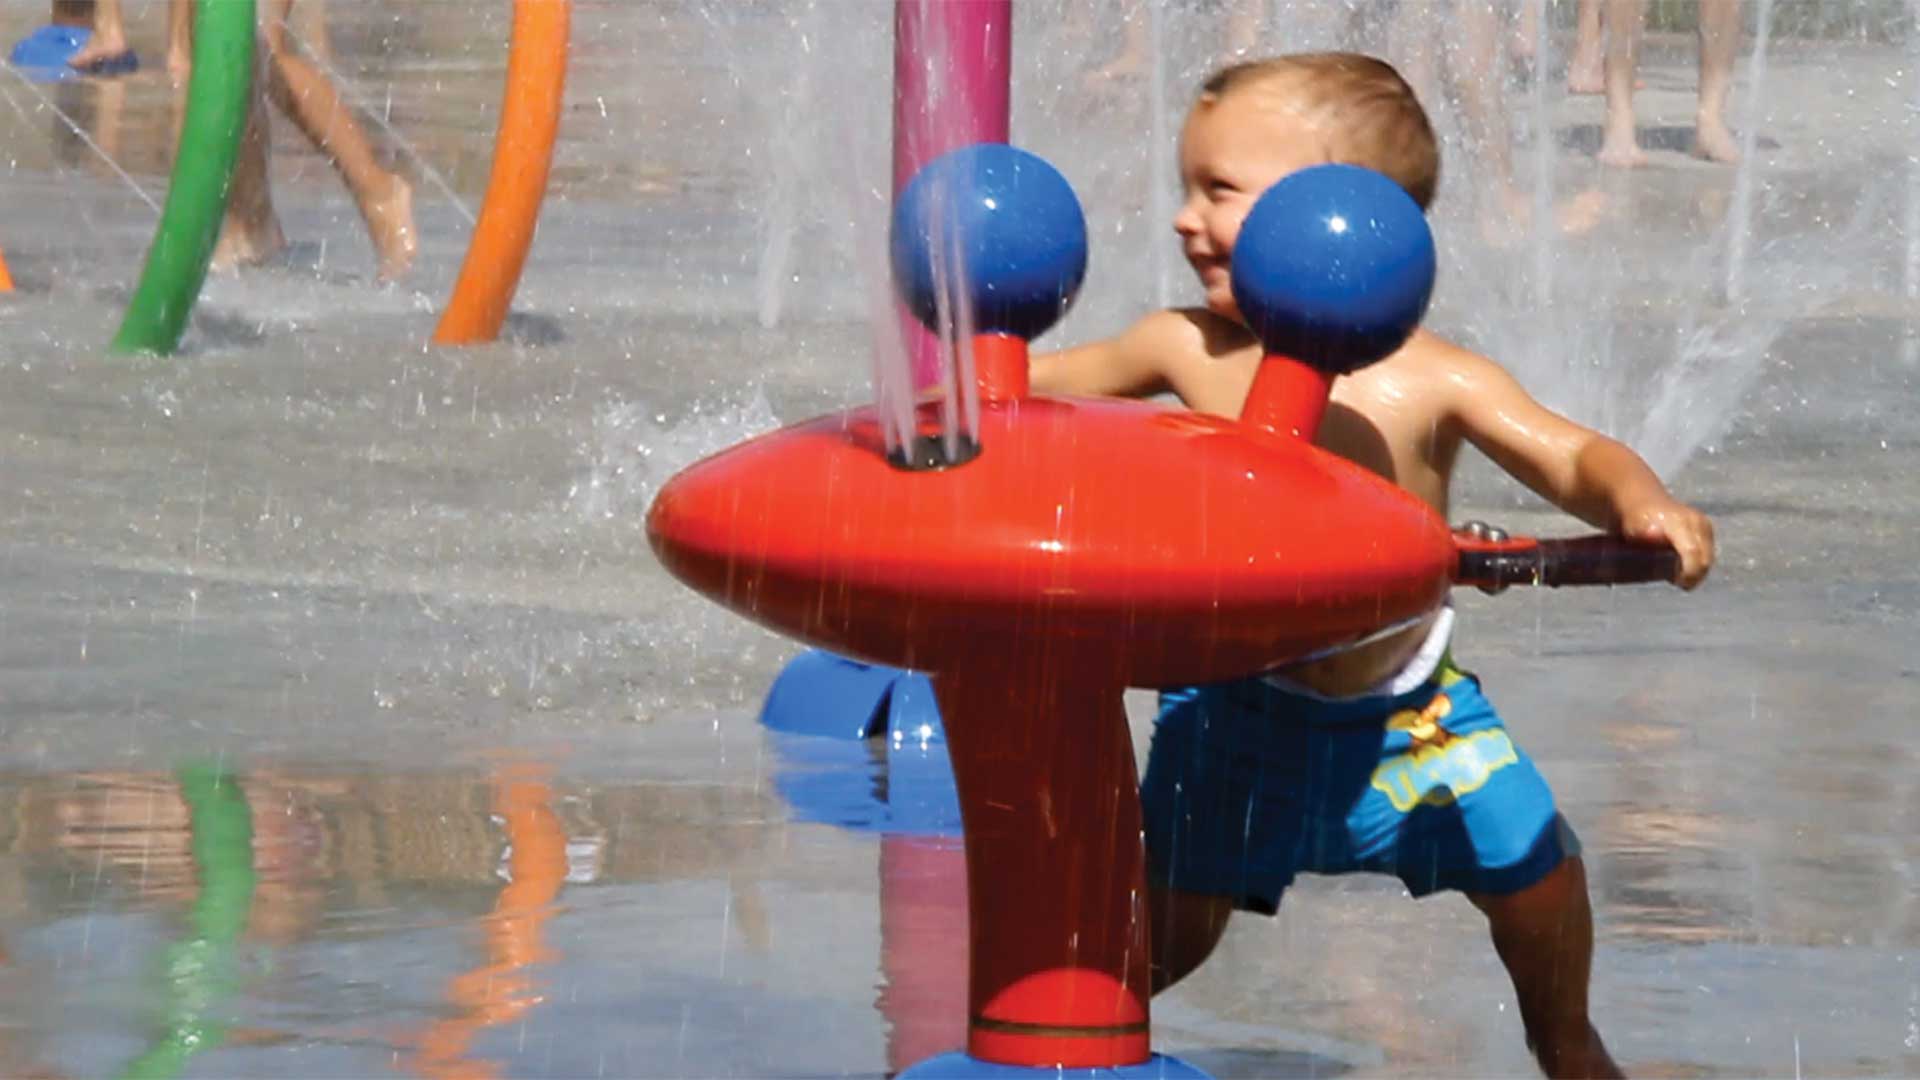 Water: Discovering the Extra Dimension of Play